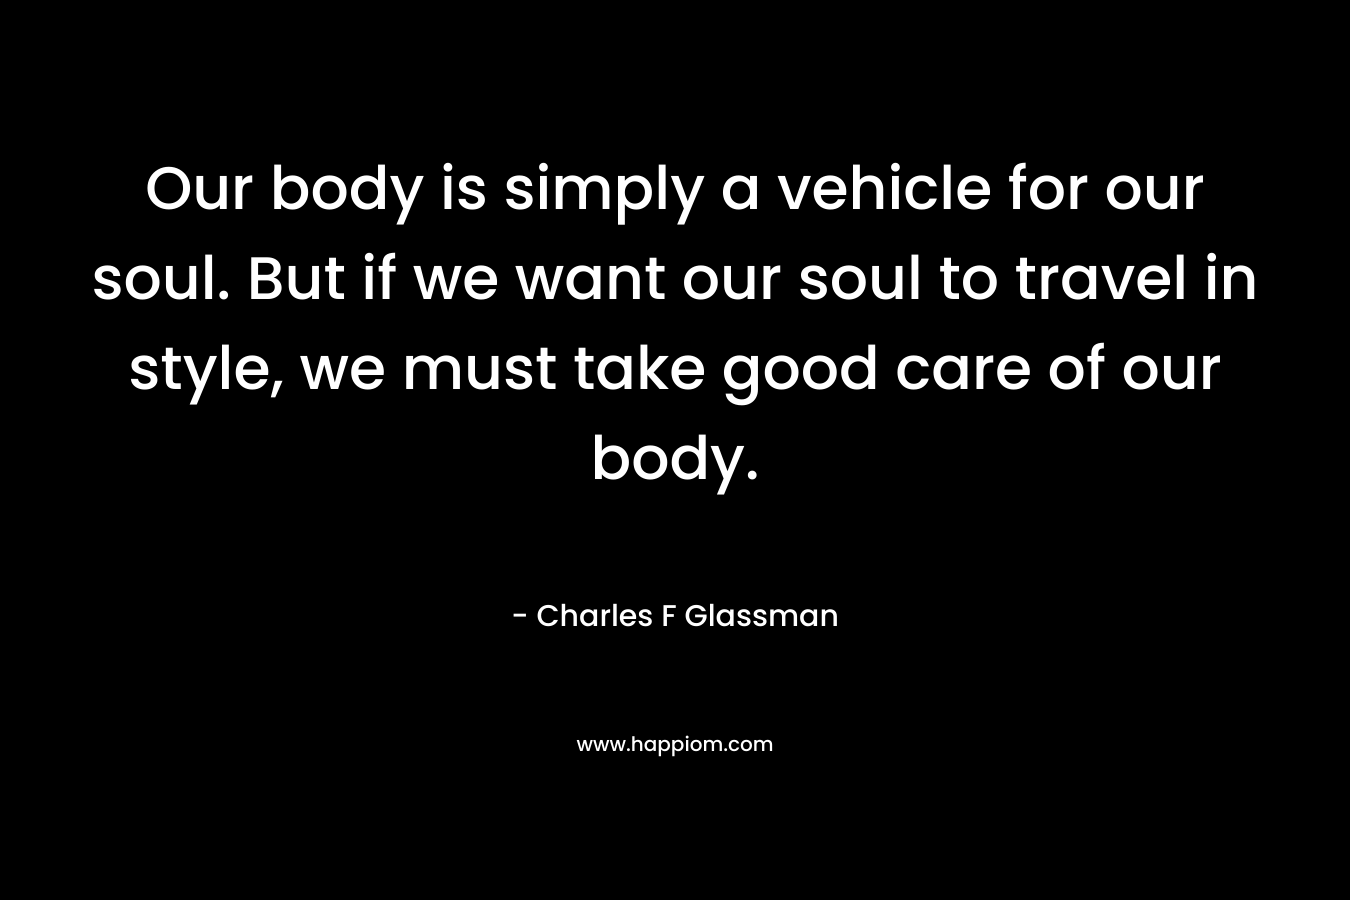 Our body is simply a vehicle for our soul. But if we want our soul to travel in style, we must take good care of our body. – Charles F Glassman